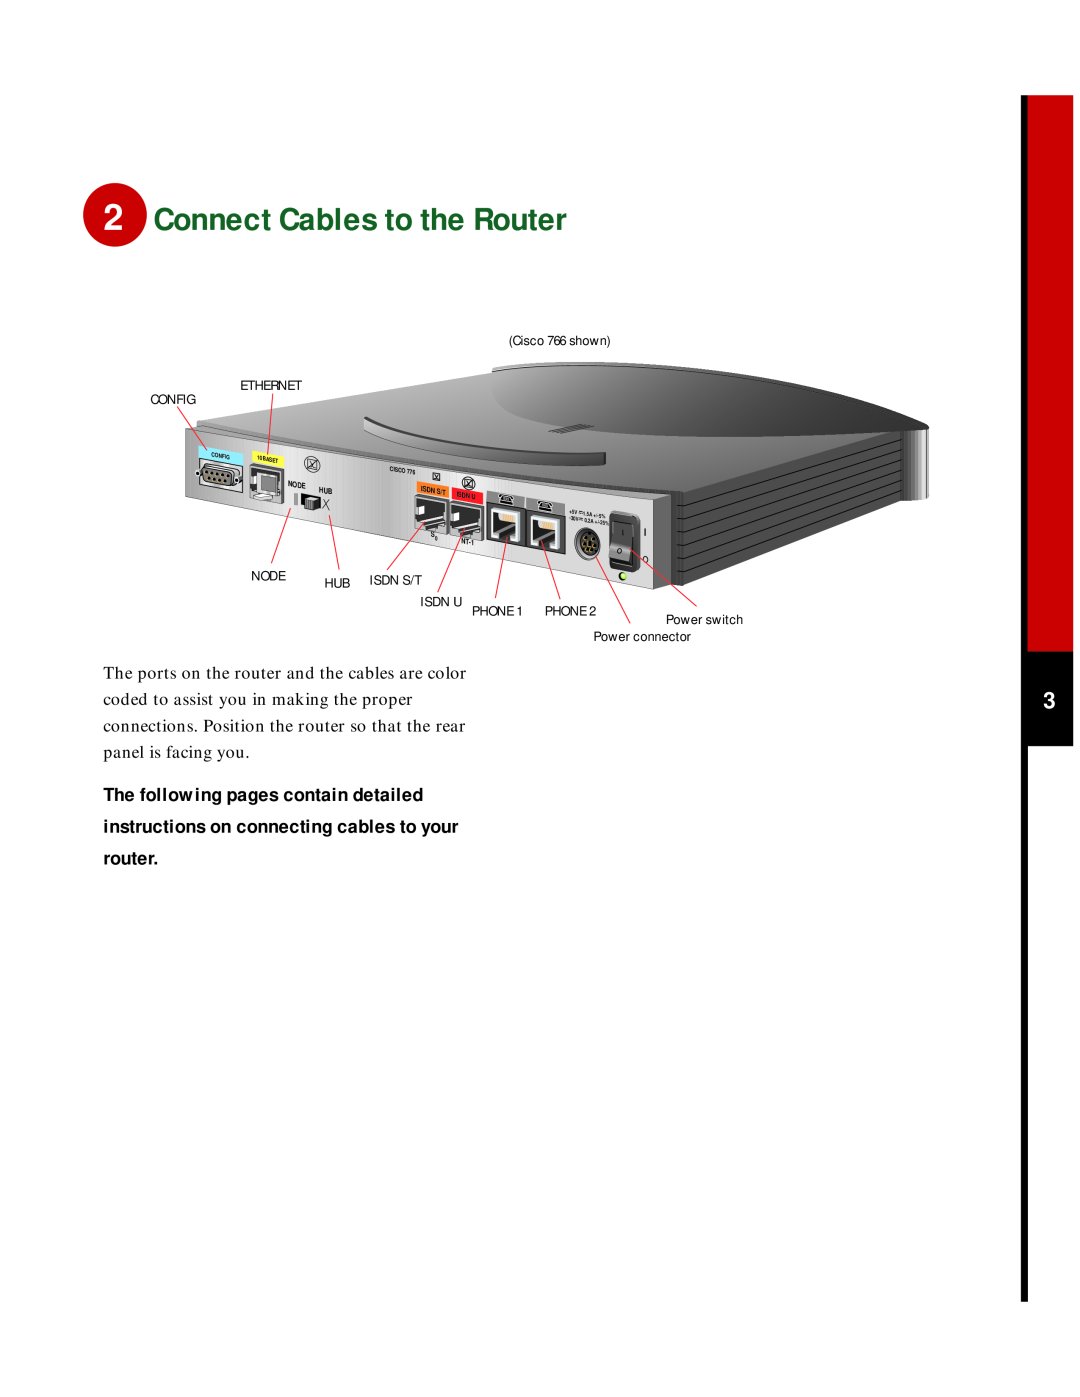 Cisco Systems 760 Connect Cables to the Router, The following pages contain detailed, Ethernet Config, Cisco 766 shown 